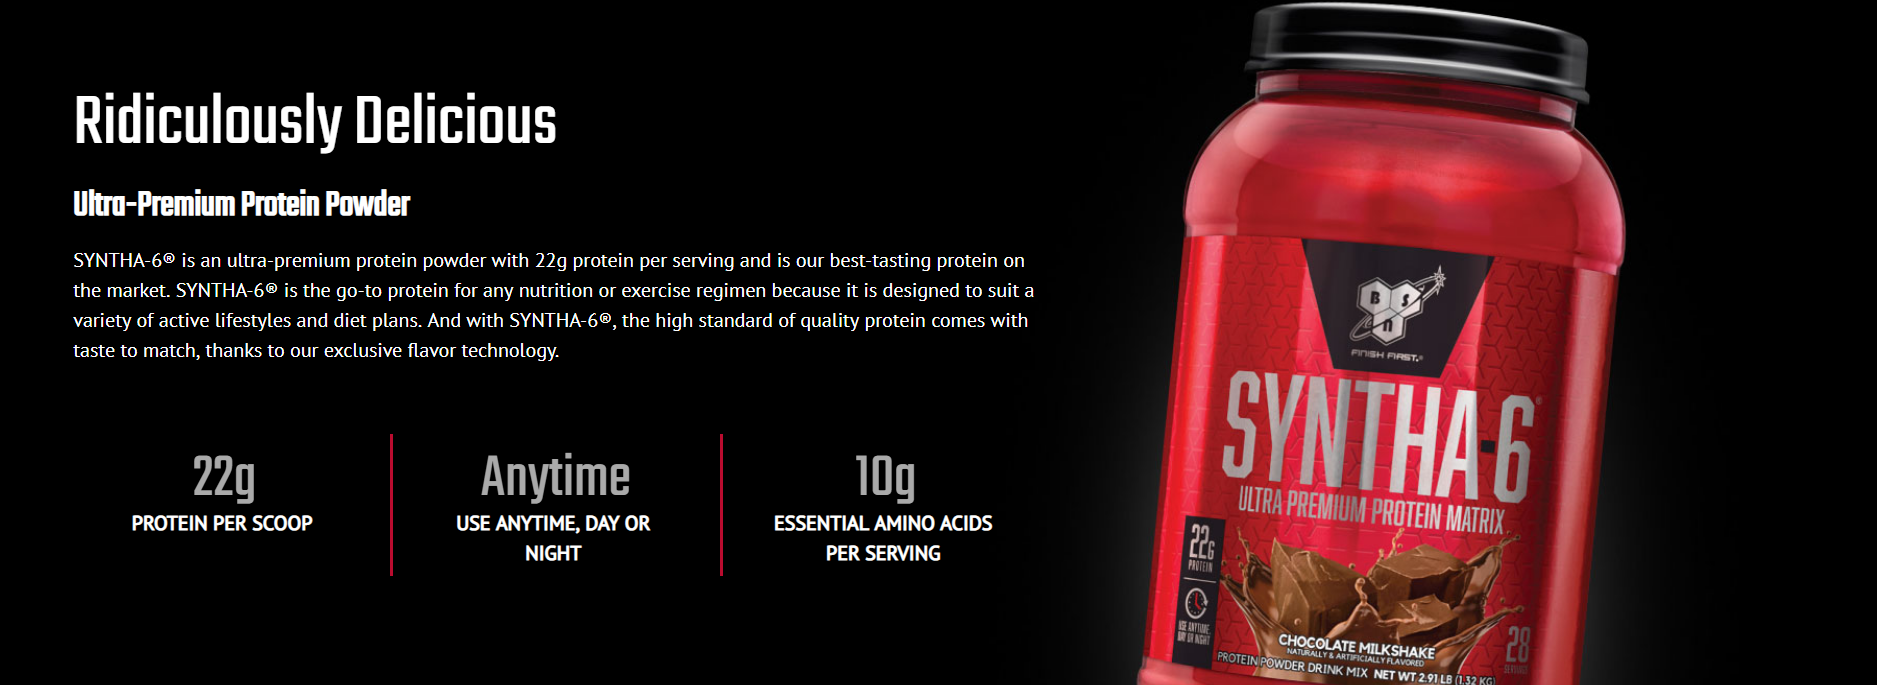 BSN SYNTHA 6- RIDICULOUSLY DELICIOUS